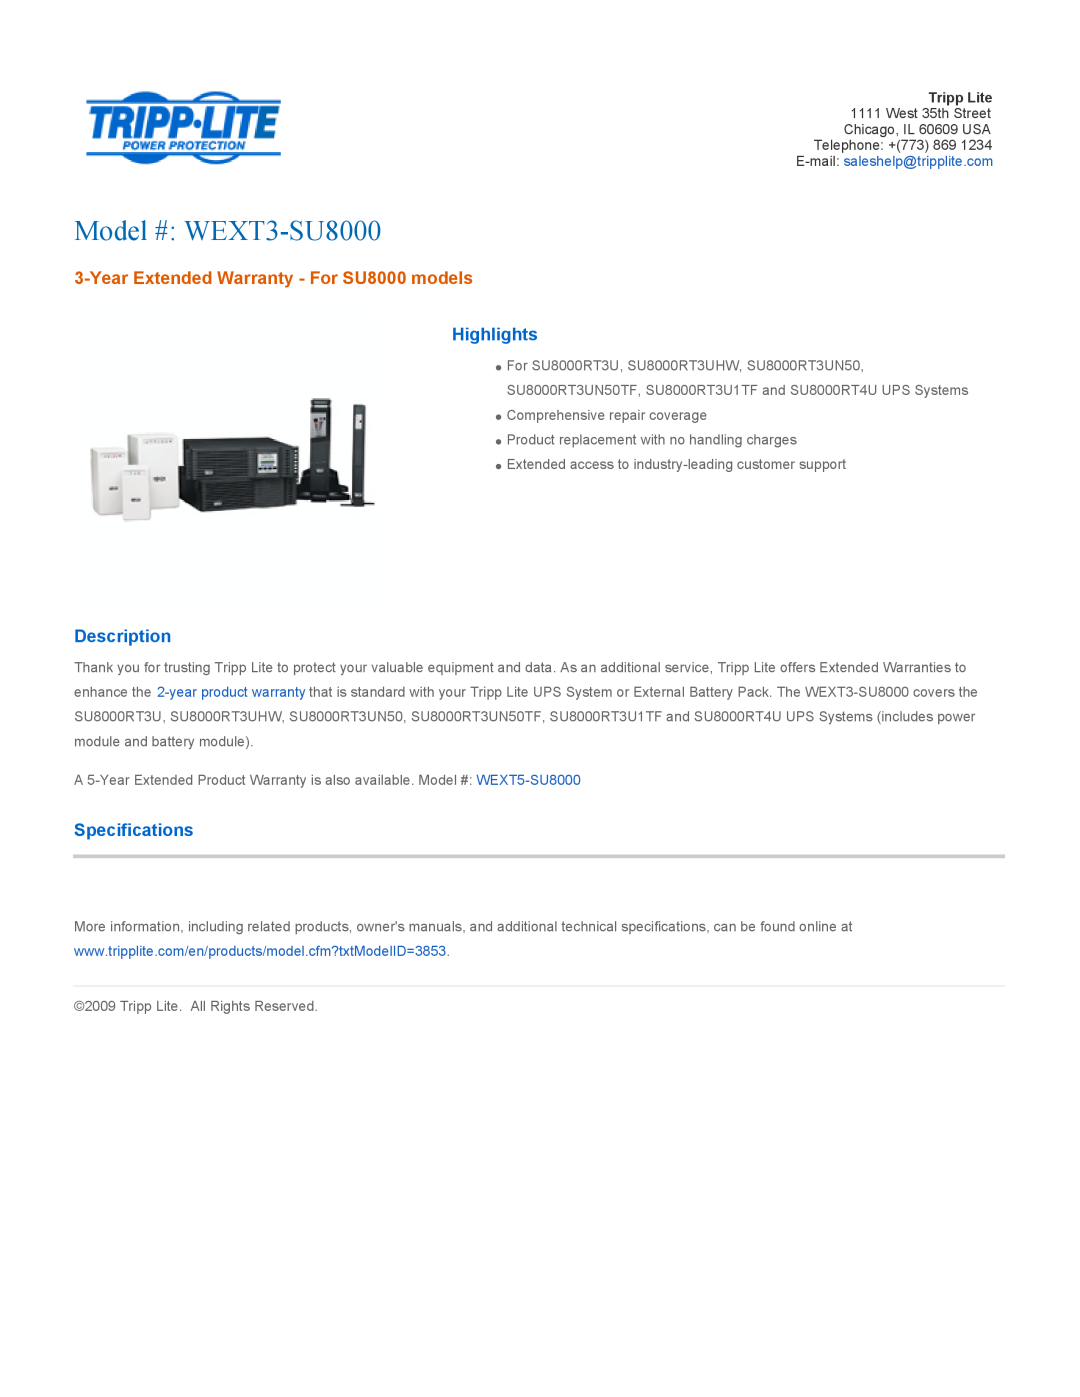 Tripp Lite specifications Model # WEXT3-SU8000, Year Extended Warranty - For SU8000 models, Highlights, Description 